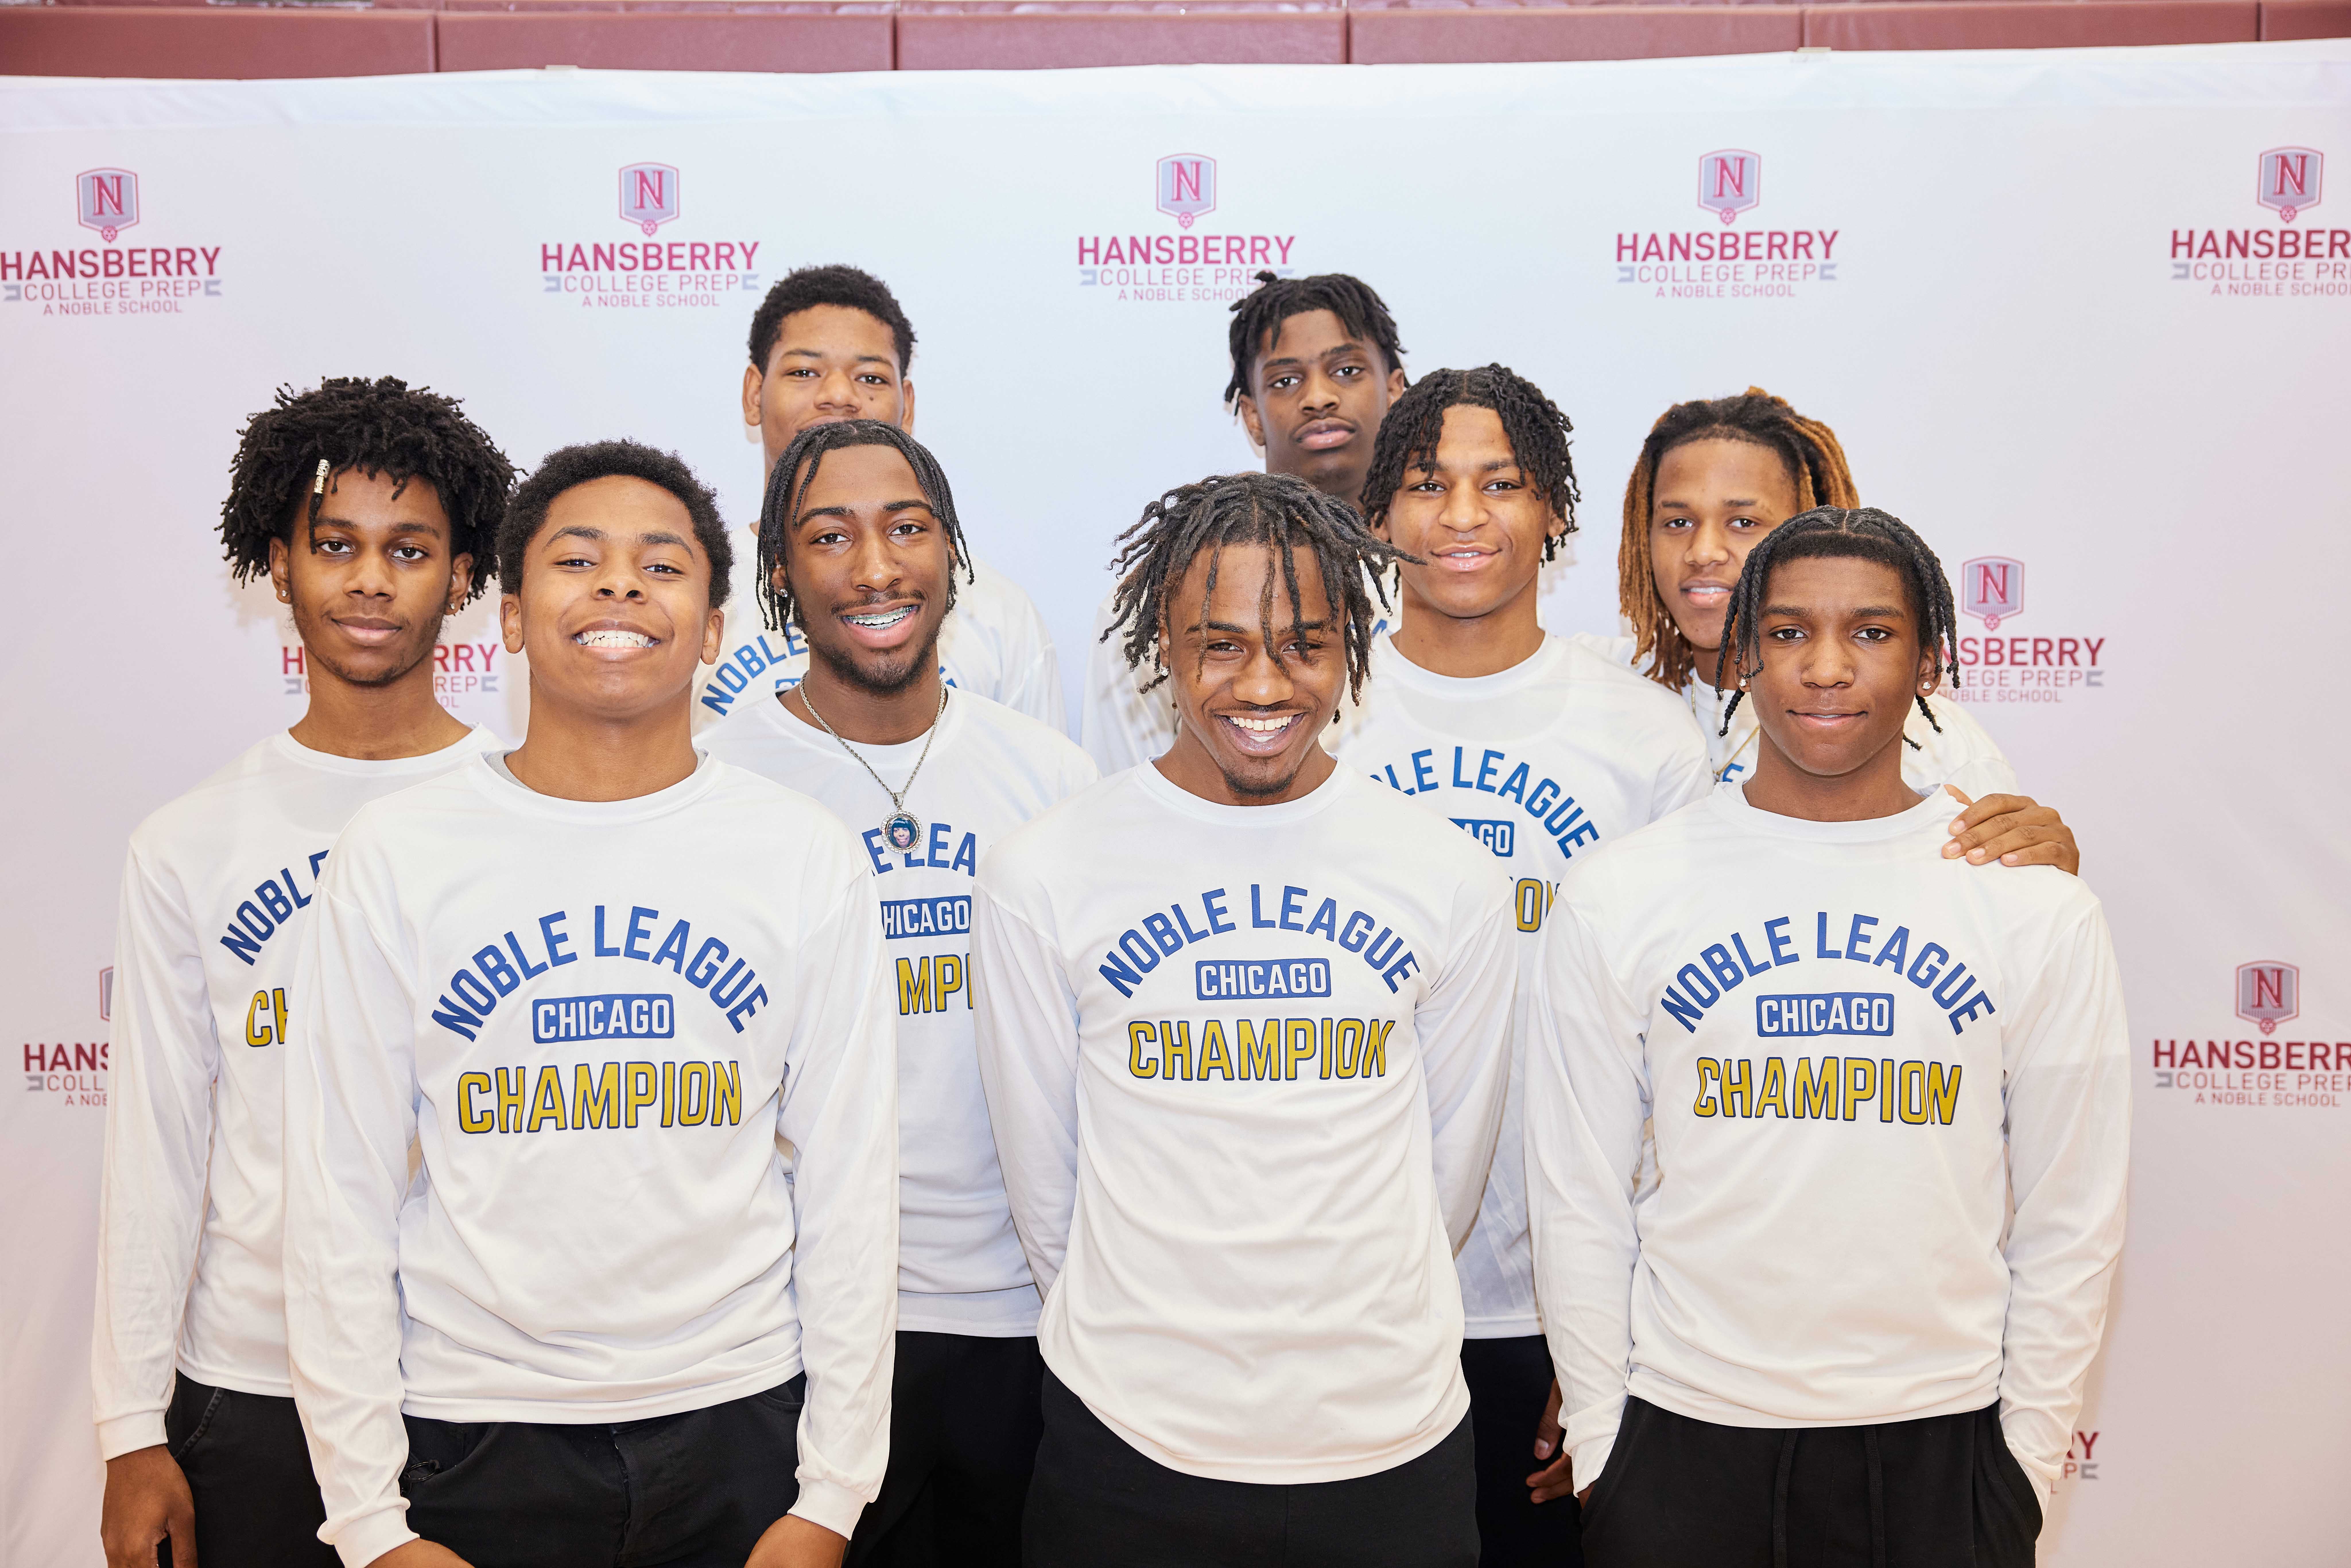 This photo shows the Hansberry College Prep boys' varsity basketball team all posing and smiling in front of a white backdrop with the HCP logo repeated on it.